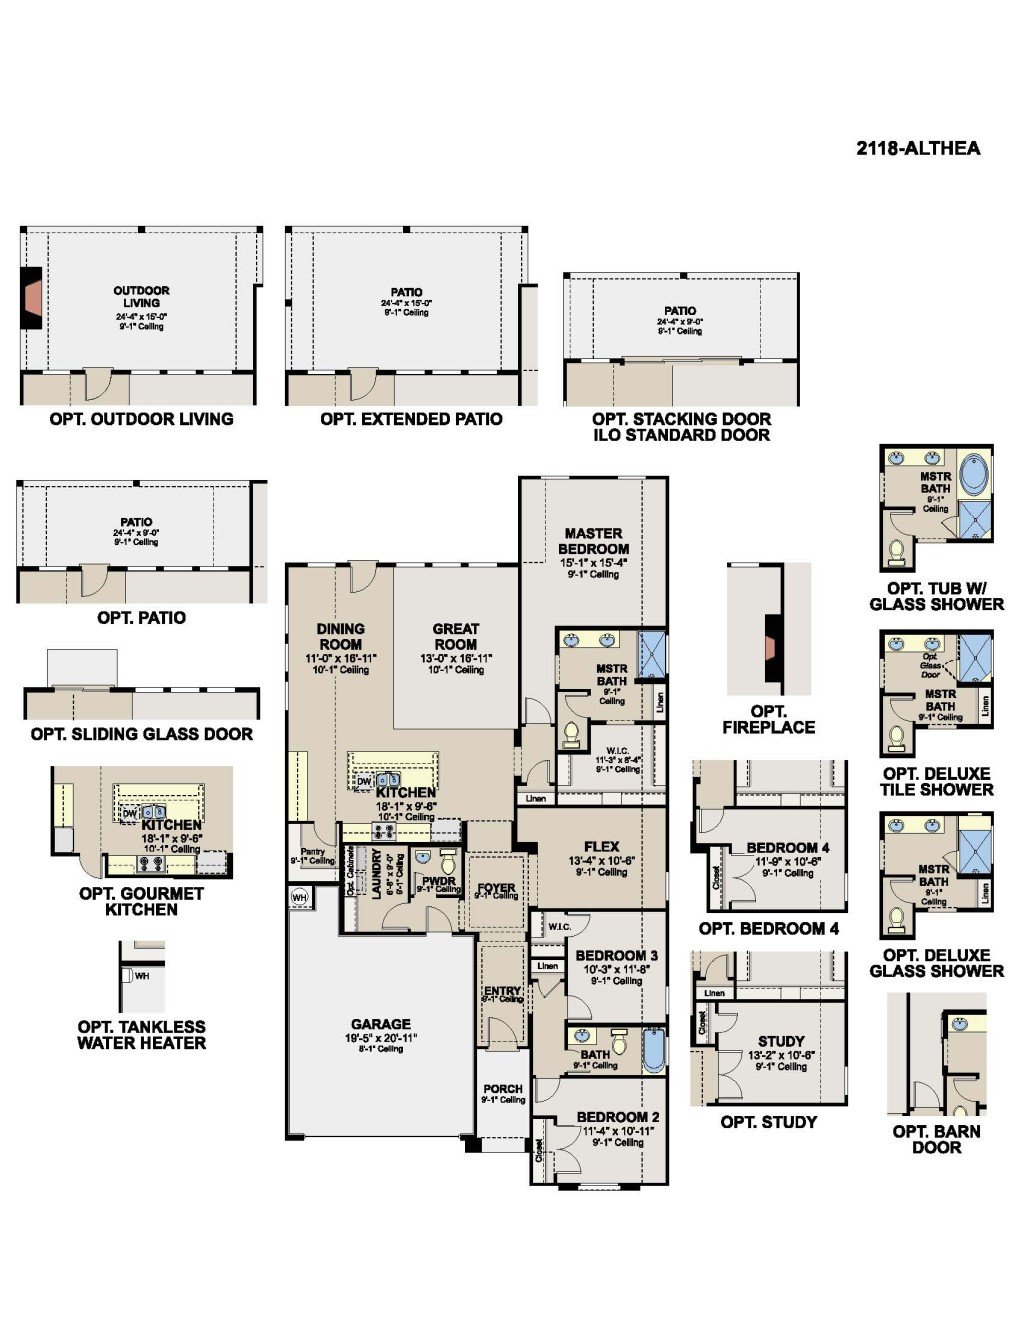 Althea Home Design Layout